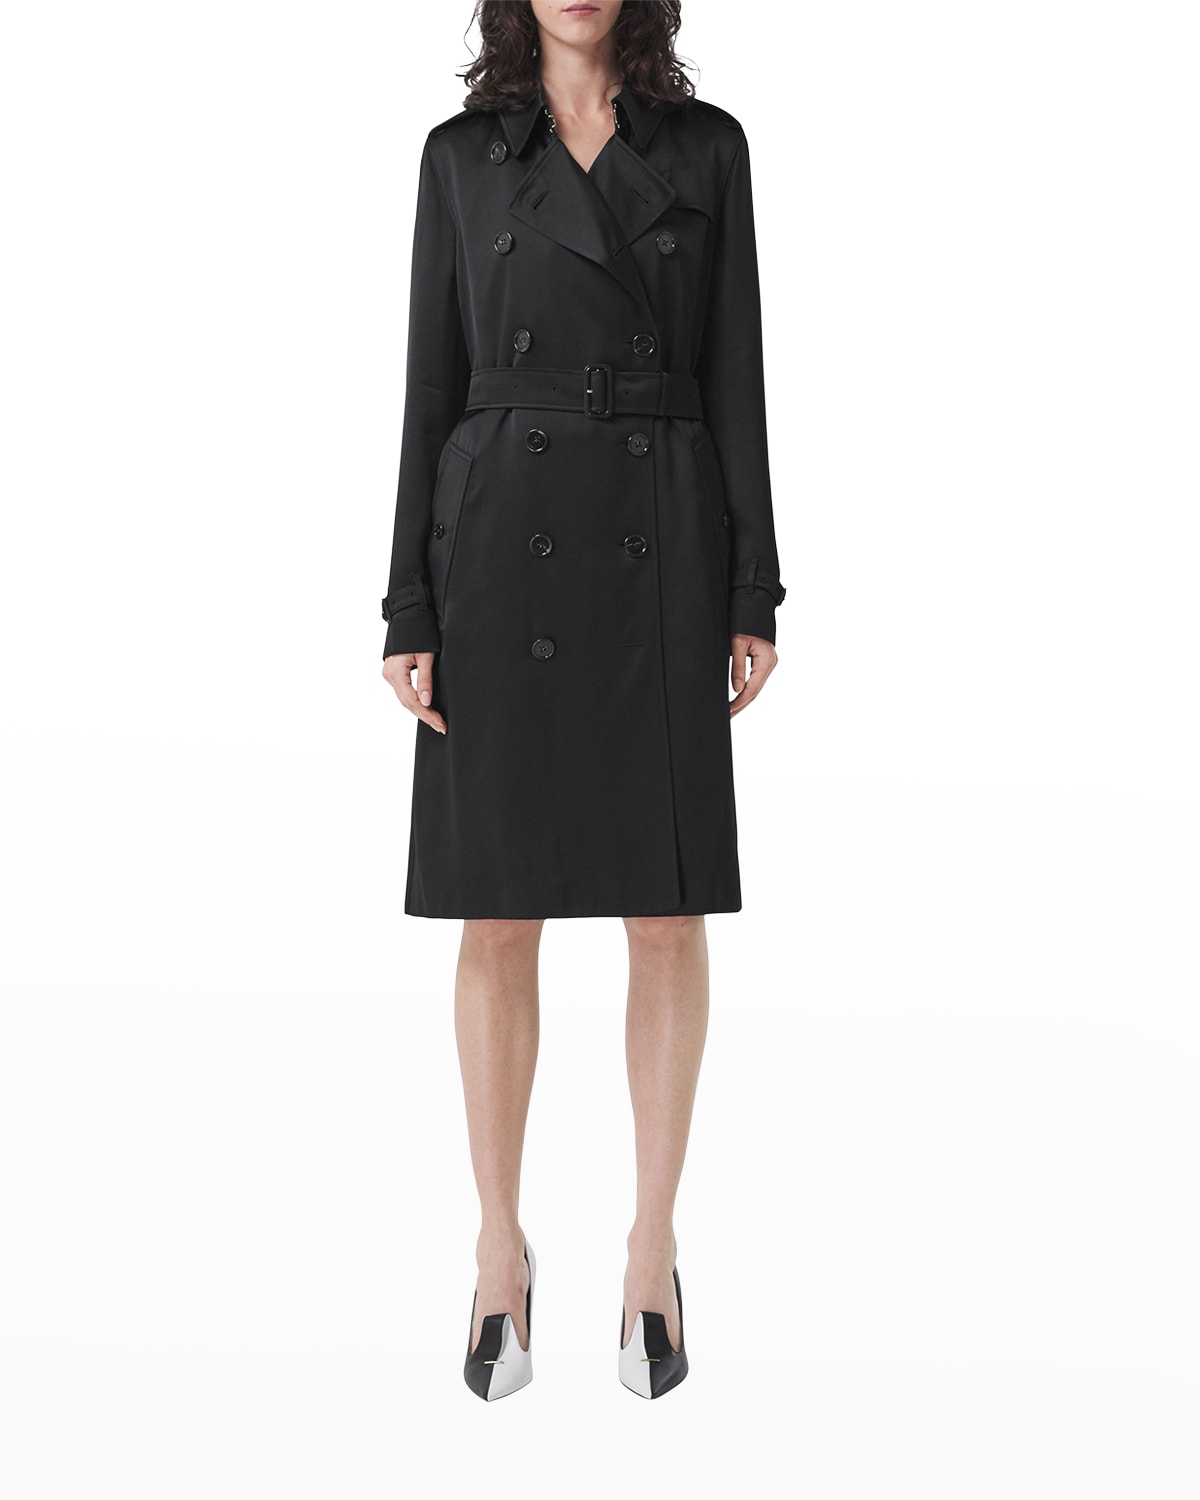 Burberry Kensington Double-Breasted Trench Coat